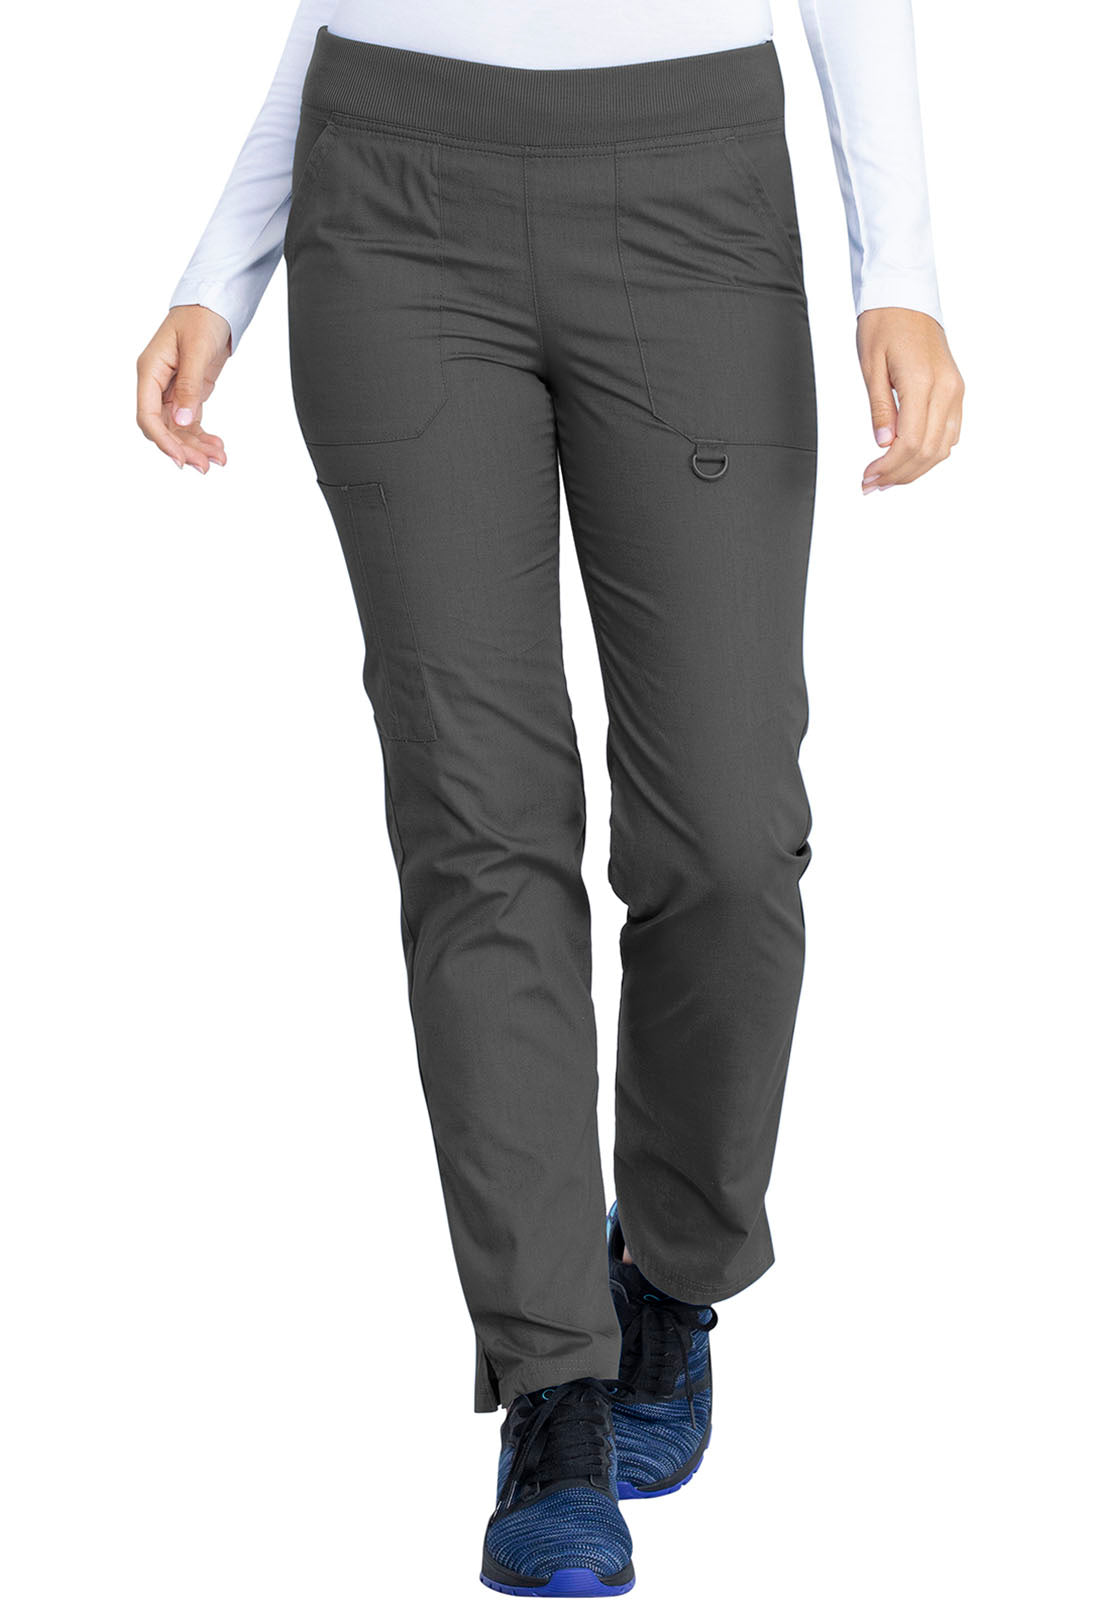 Exist. Conjunto Mujer Dickies EDS Signature Mod.86806/DK125 Pewter